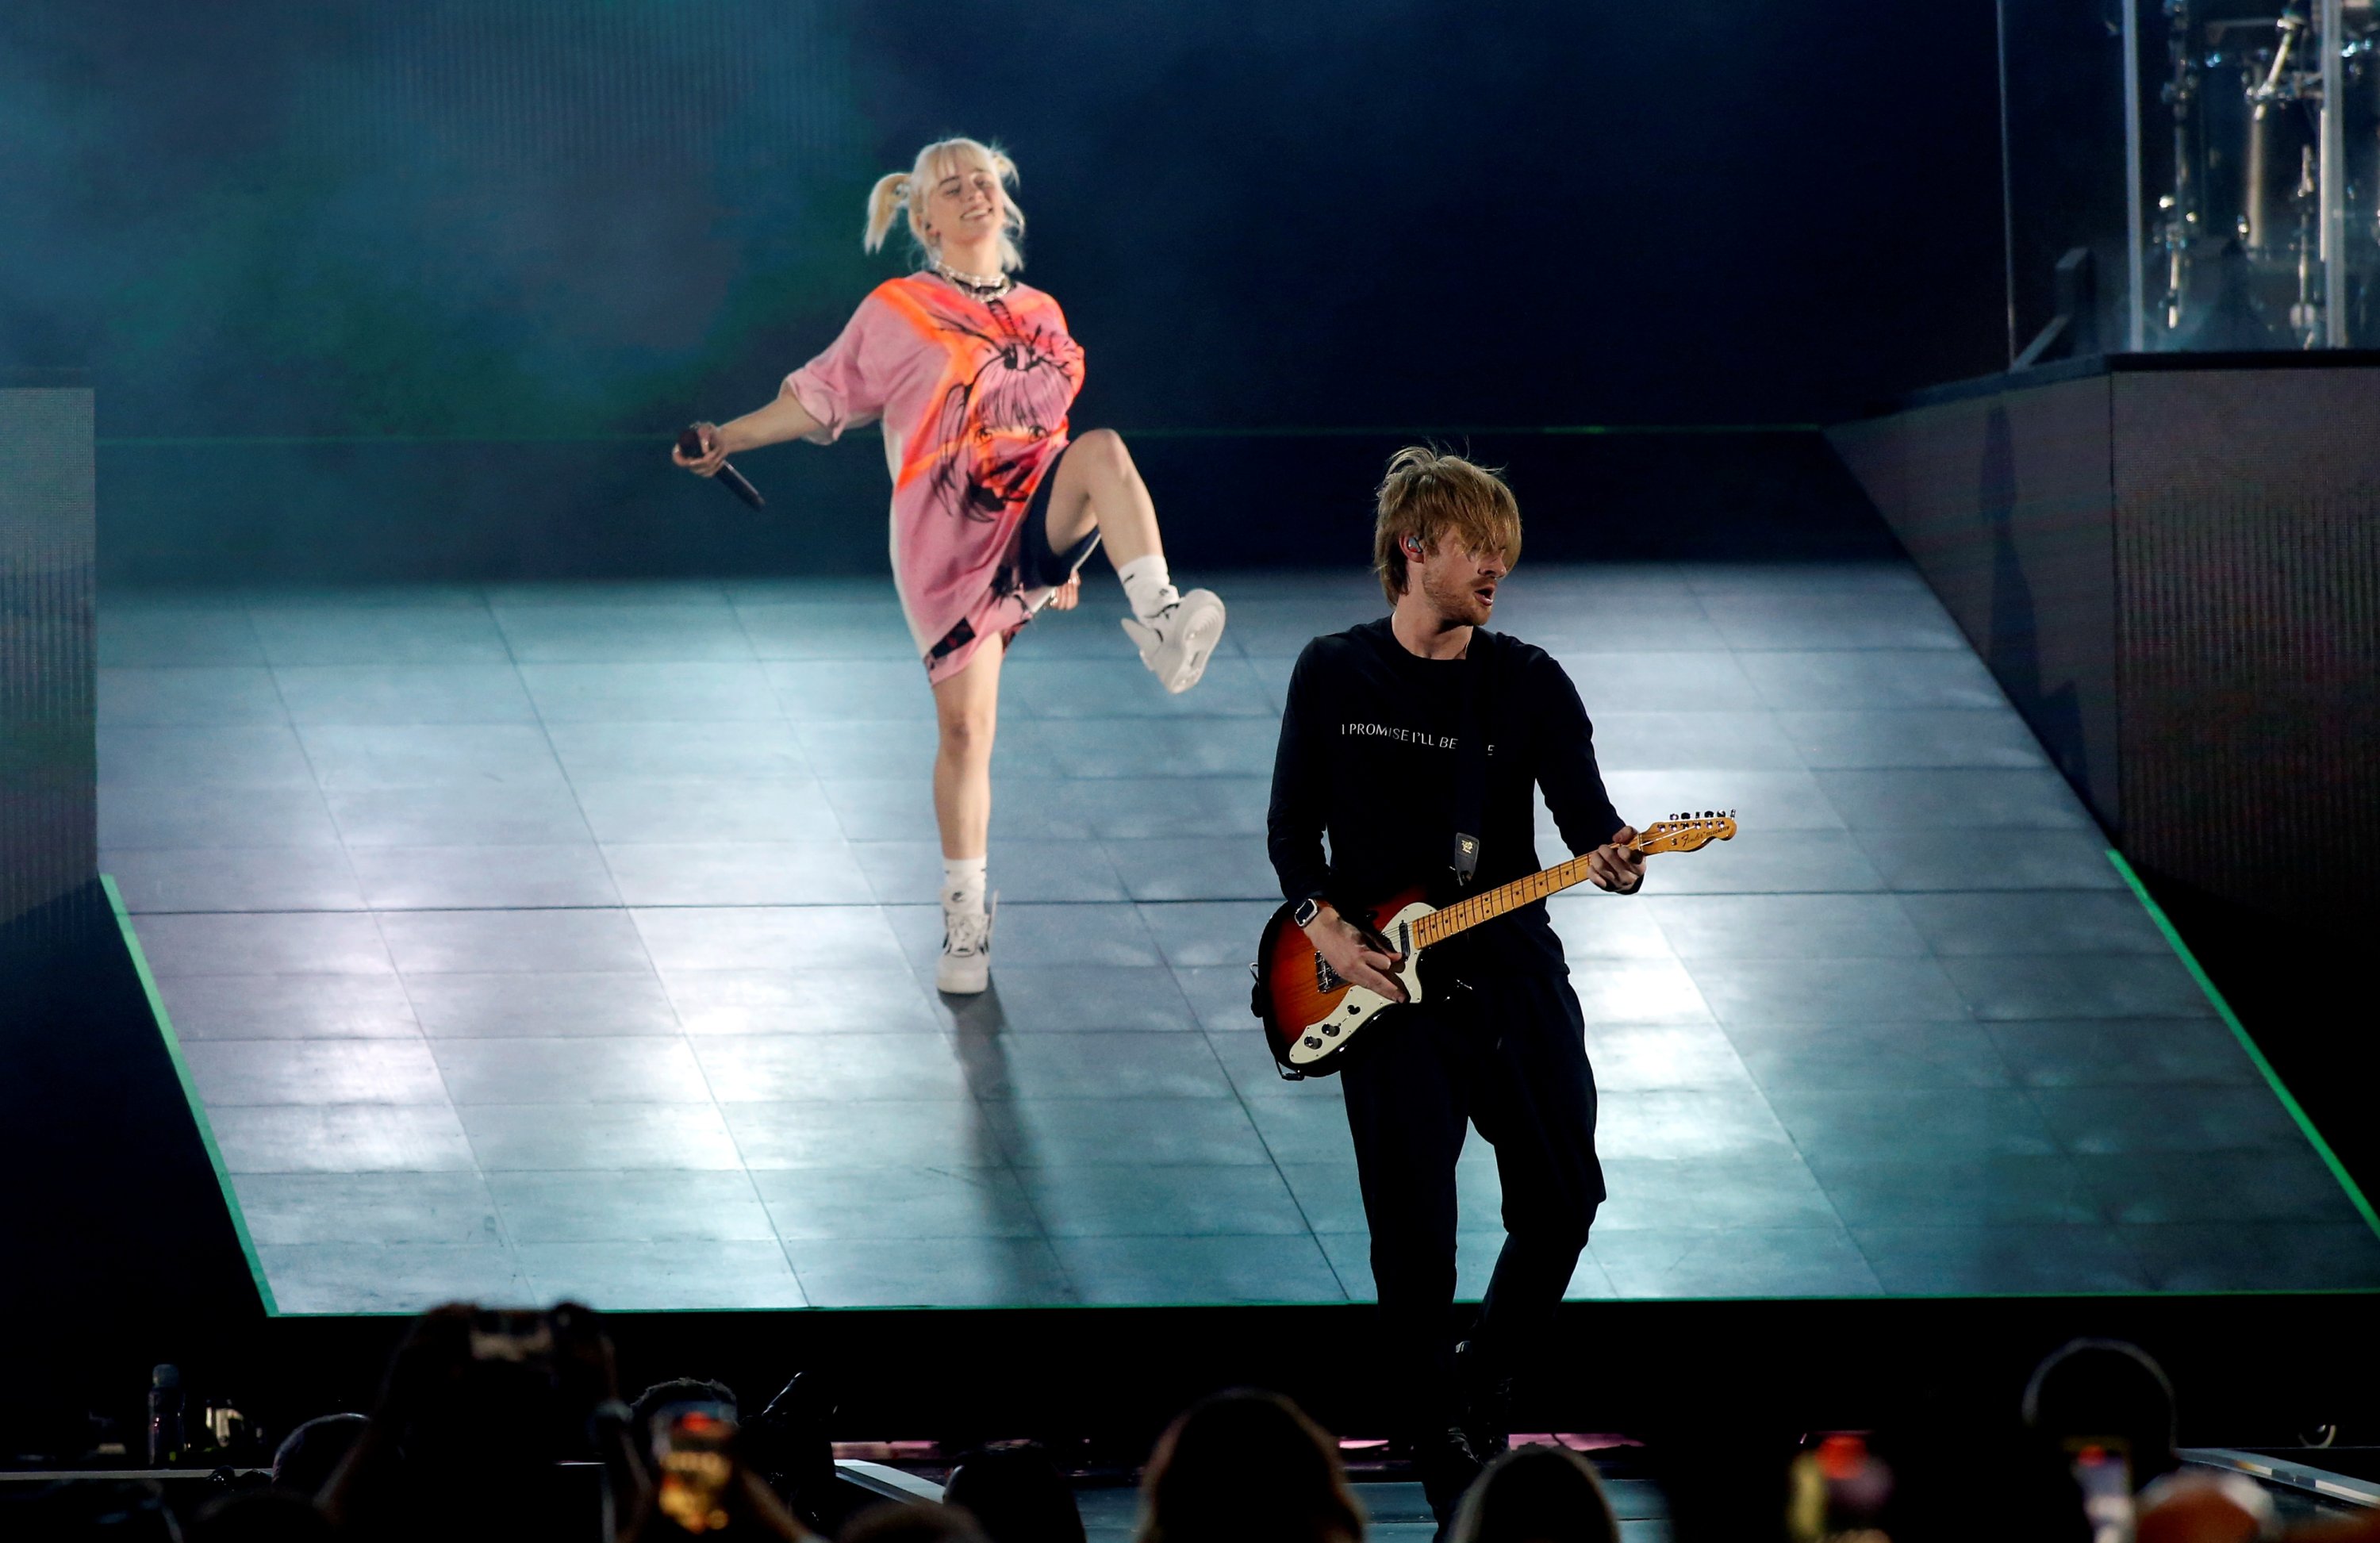 Billie Eilish performs with her brother Finneas during the second day of the iHeartRadio Music Festival at T-Mobile Arena in Las Vegas, Nevada, U.S. Sept. 18, 2021. (Reuters Photo)